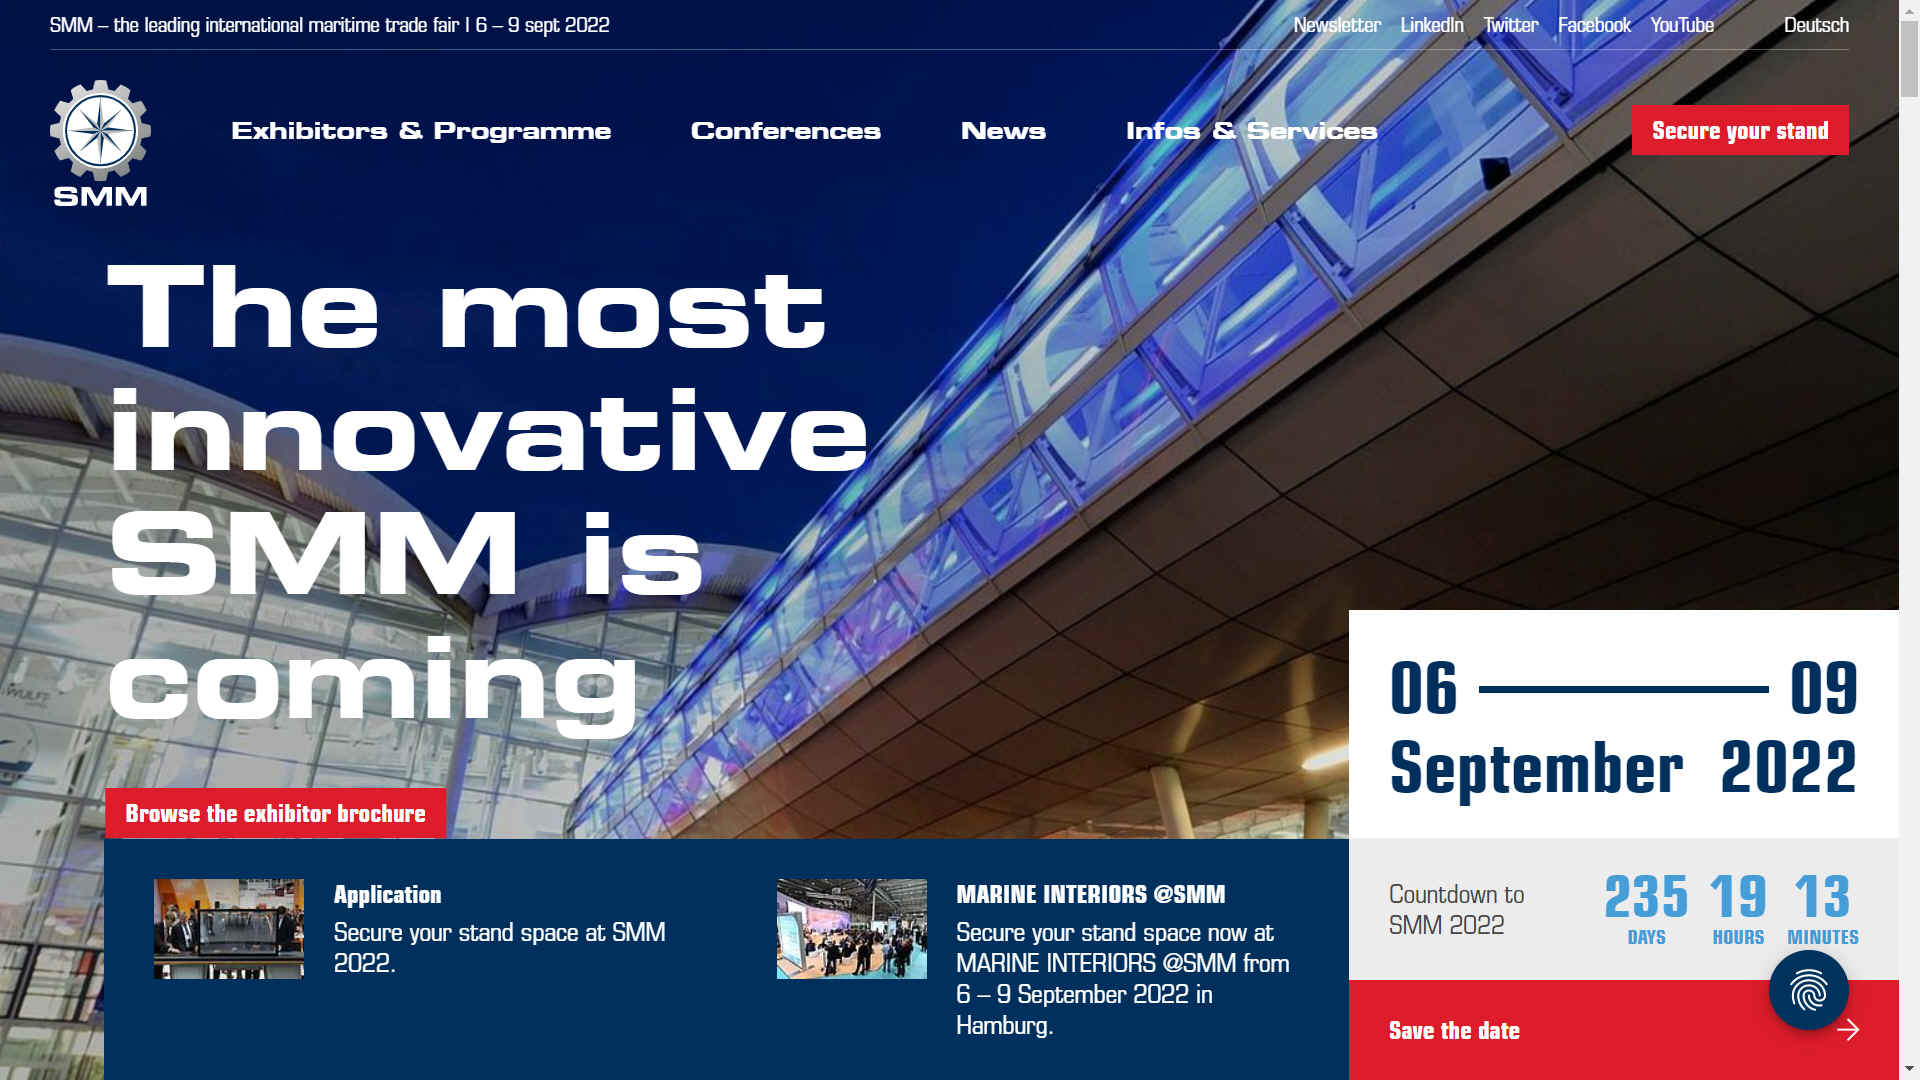 The SMM international maritime fair 6- 9 September 2022 holds to be one of the most innovative events this year